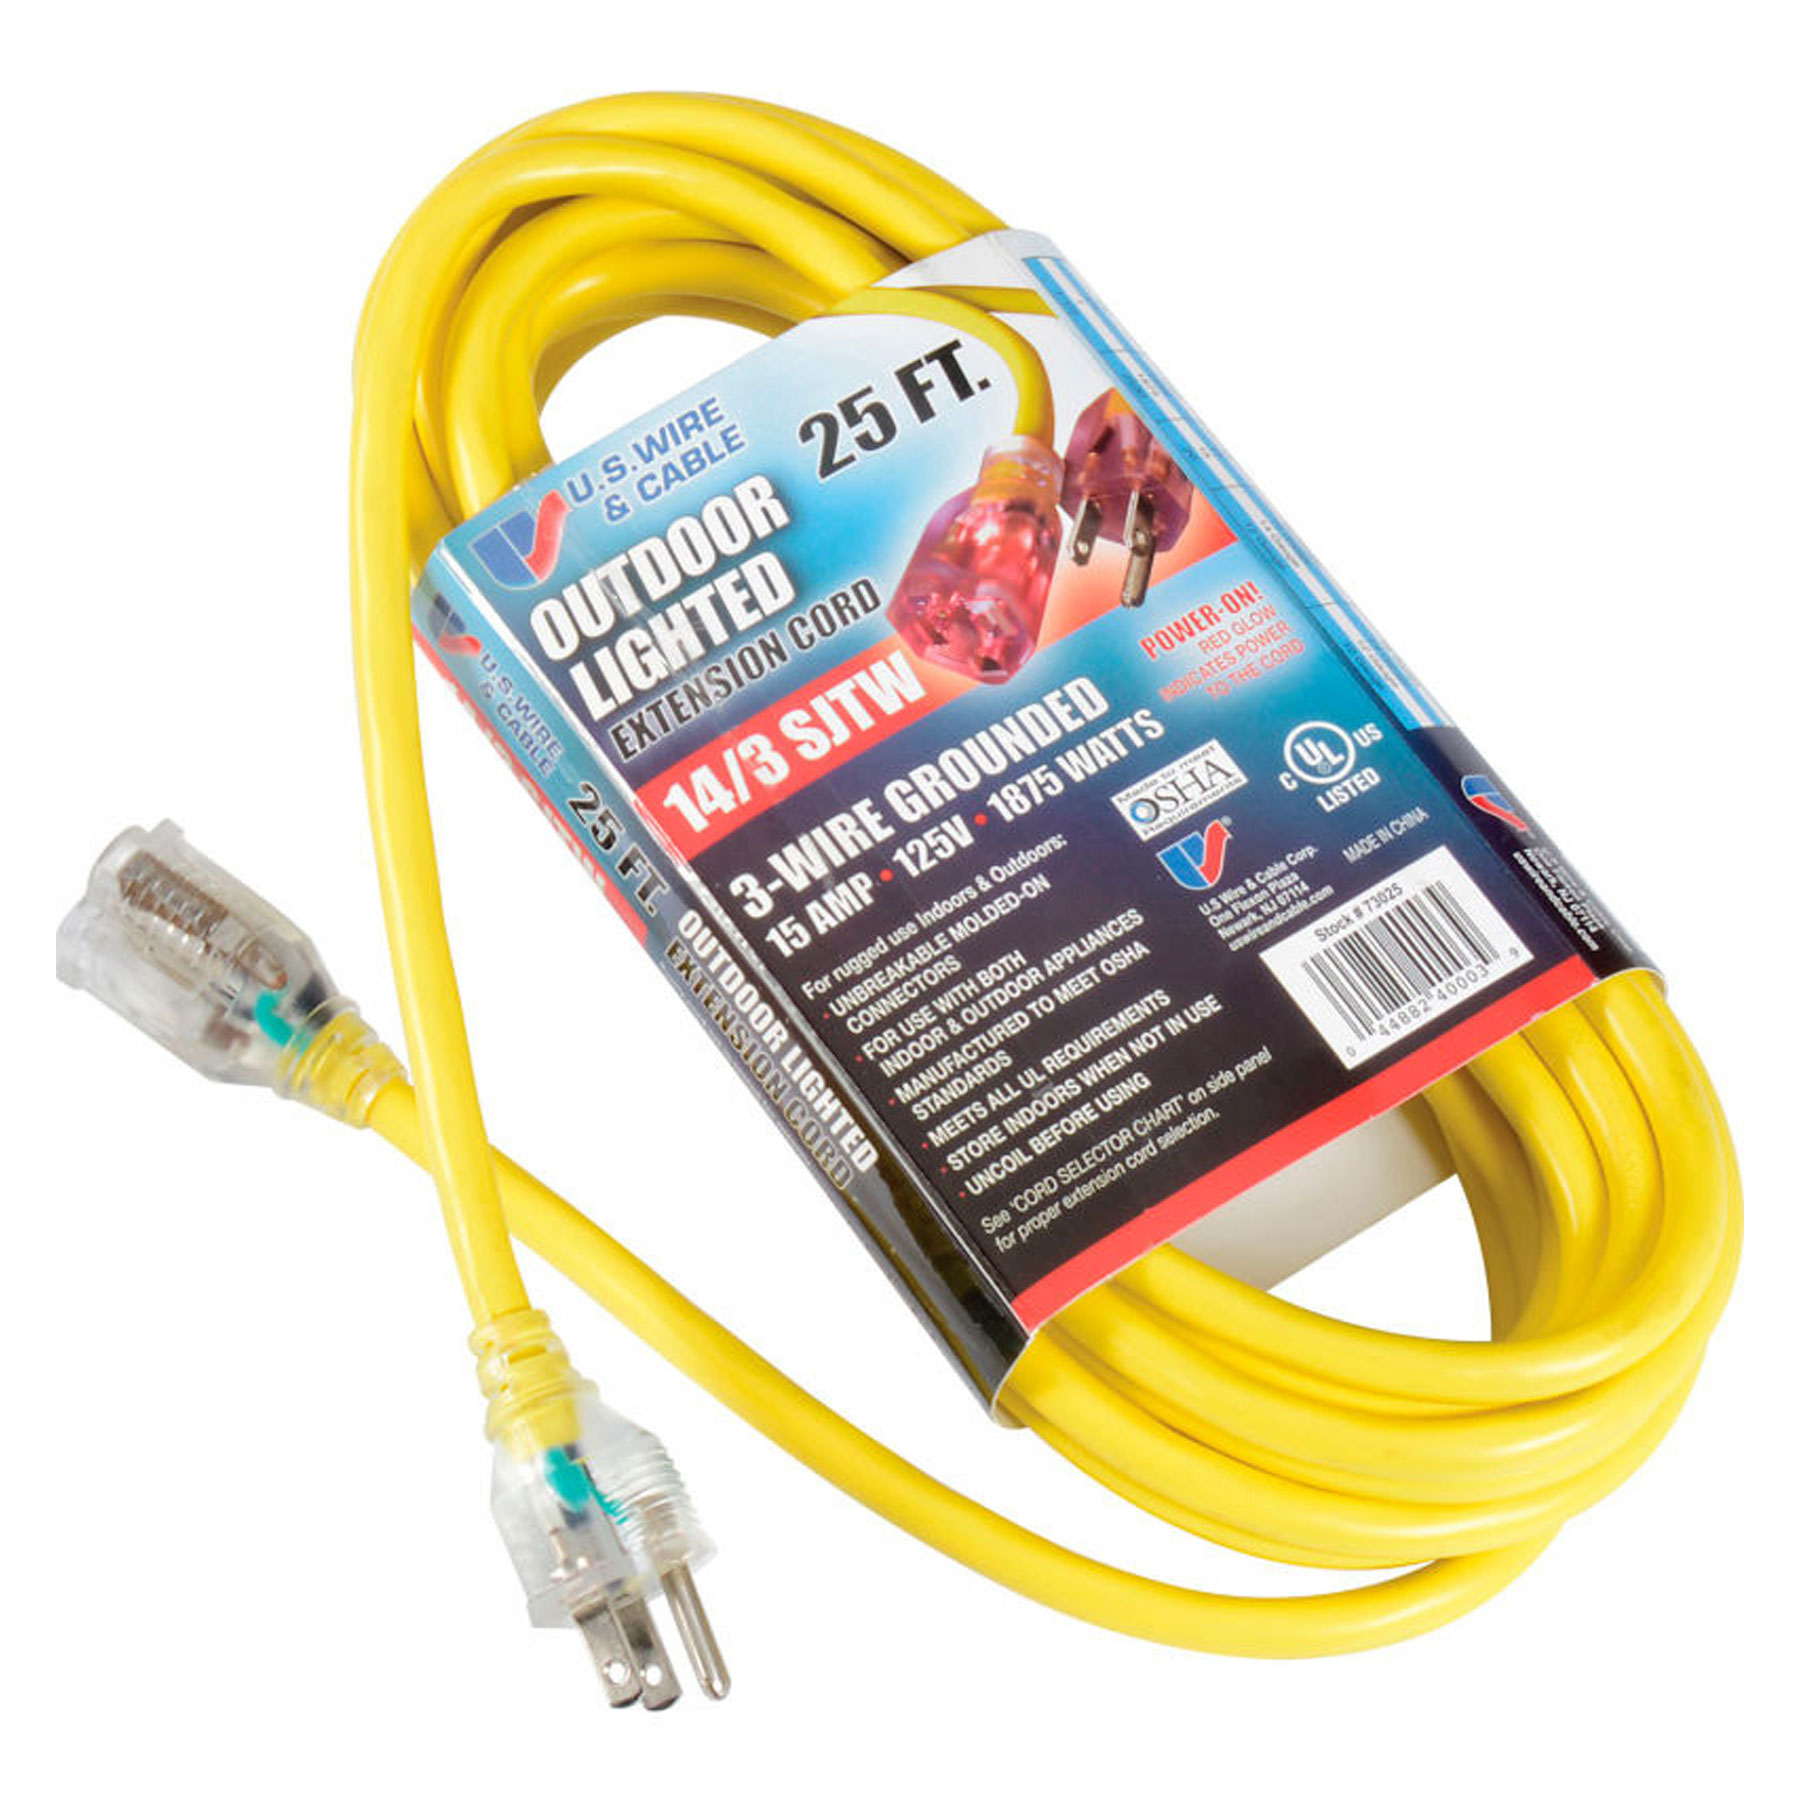 EXT CORD 14/3 25' YELLOW LIGHTED ENDS